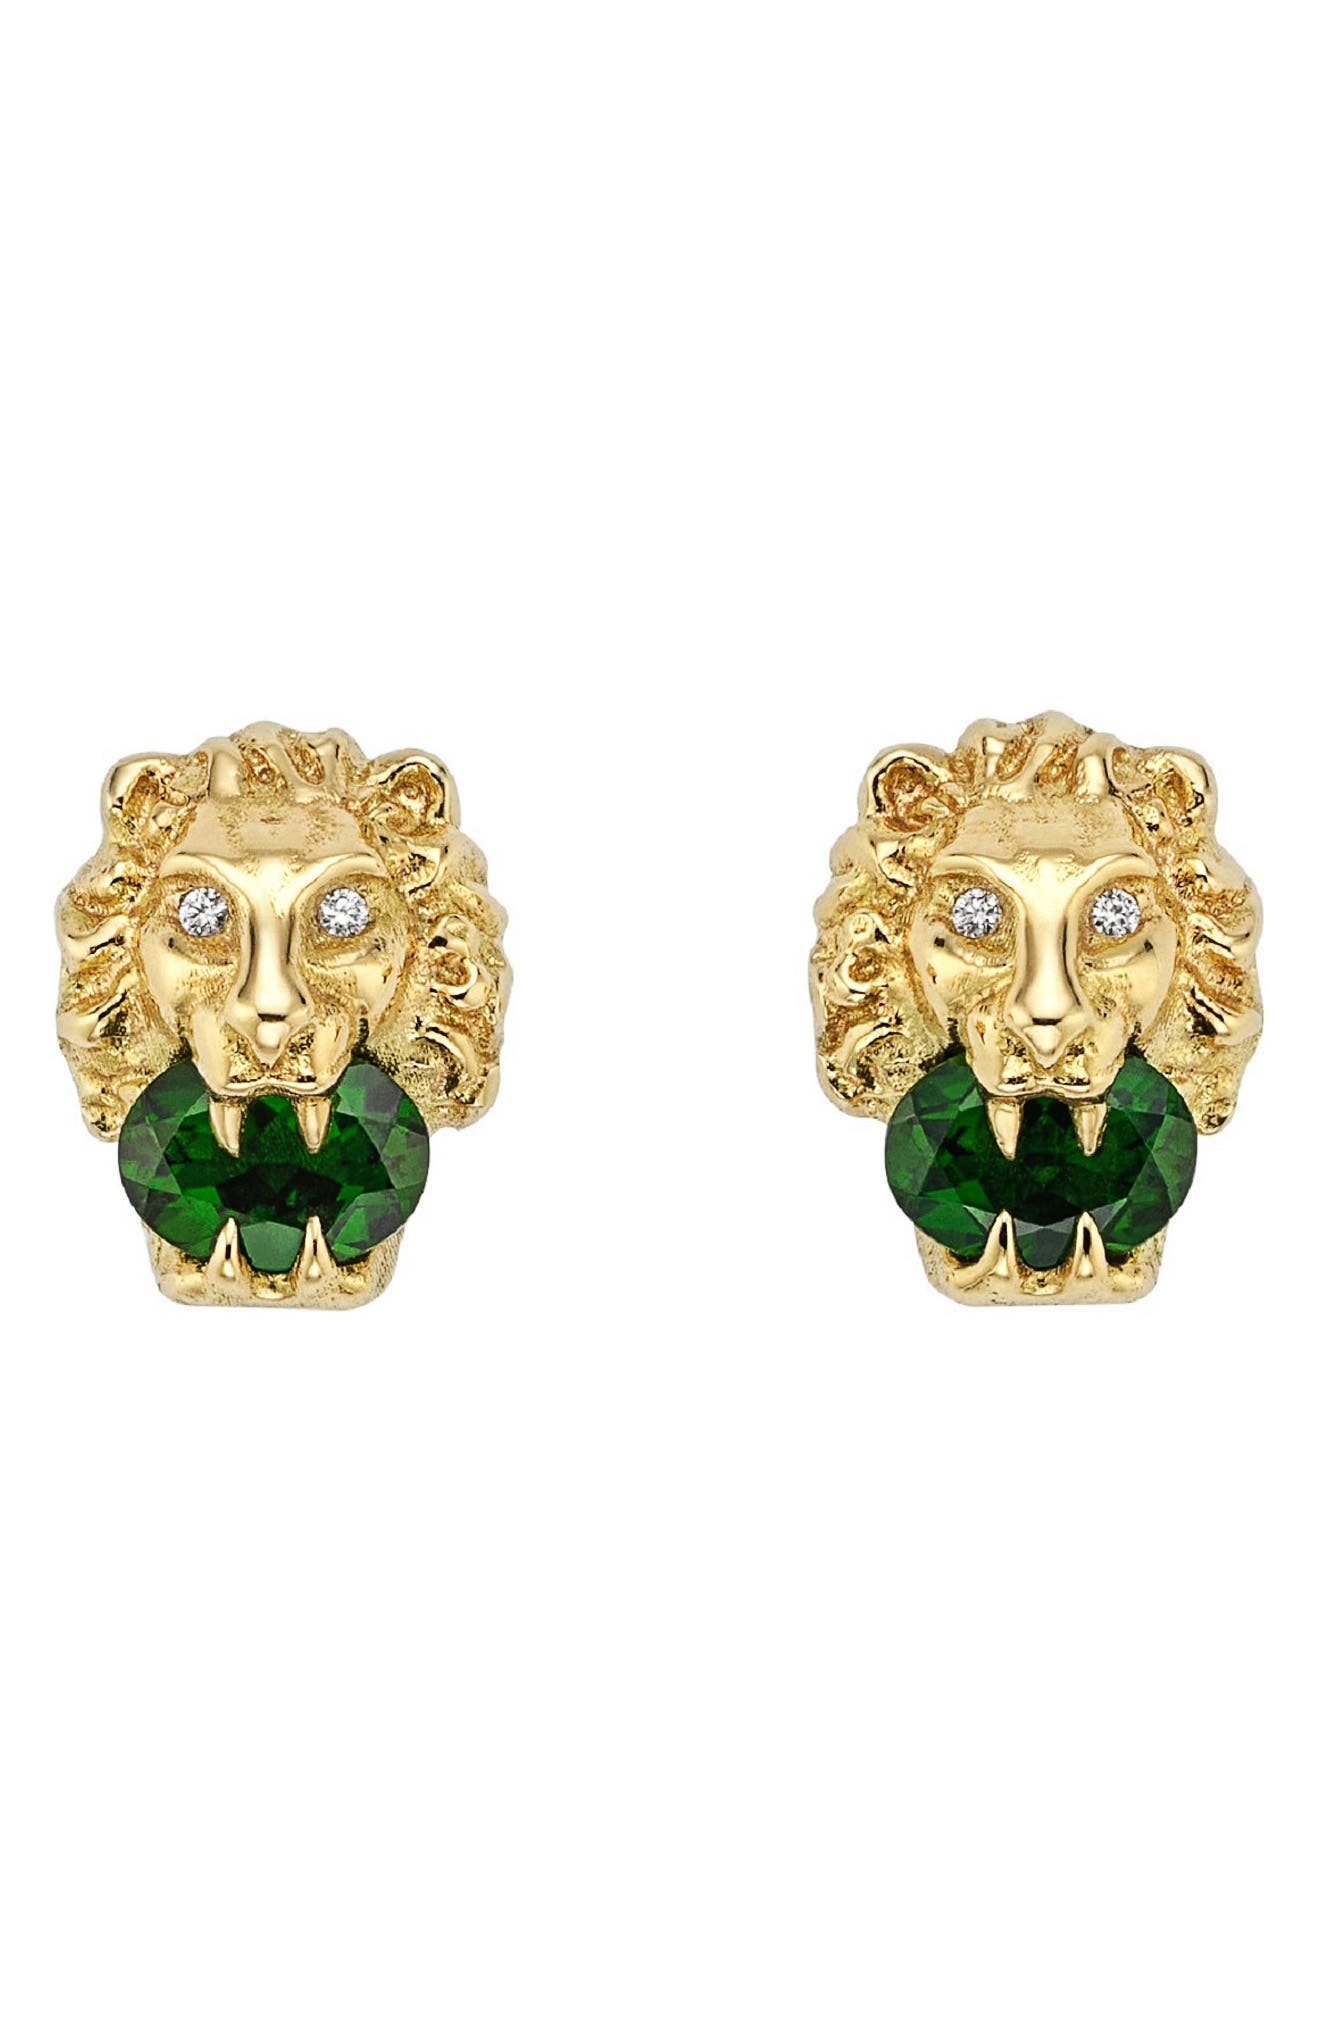 Gucci Lion Head Diamond & Stone Stud Earrings in Yellow Gold/Diamond at Nordstrom